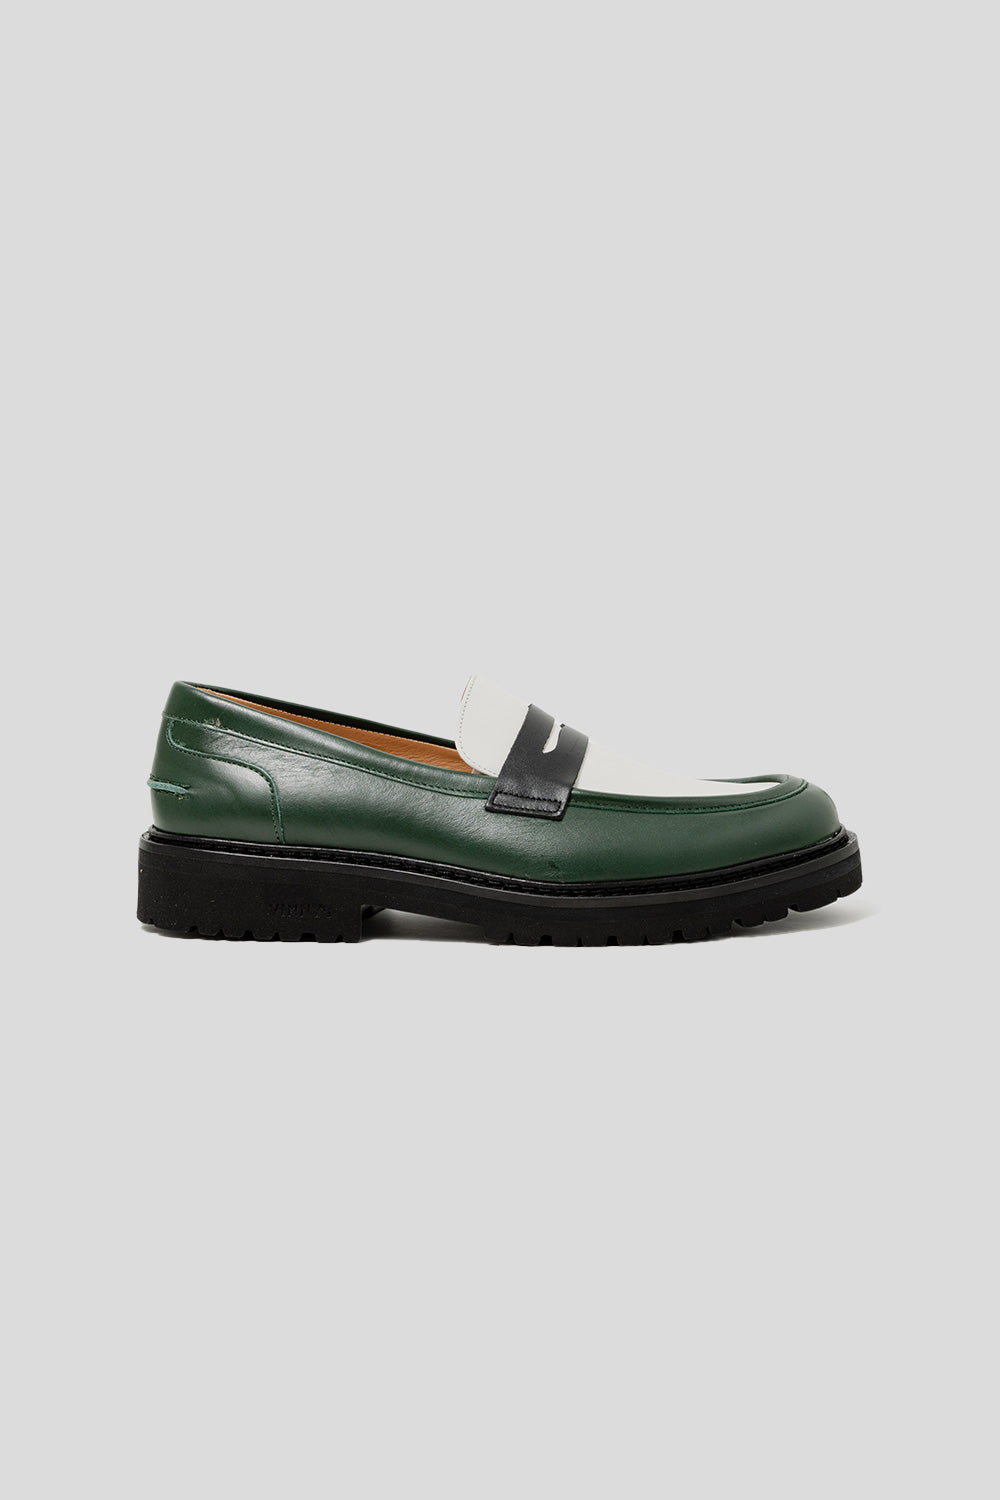 Vinny's Richee Penny Loafer in Green / White / Black